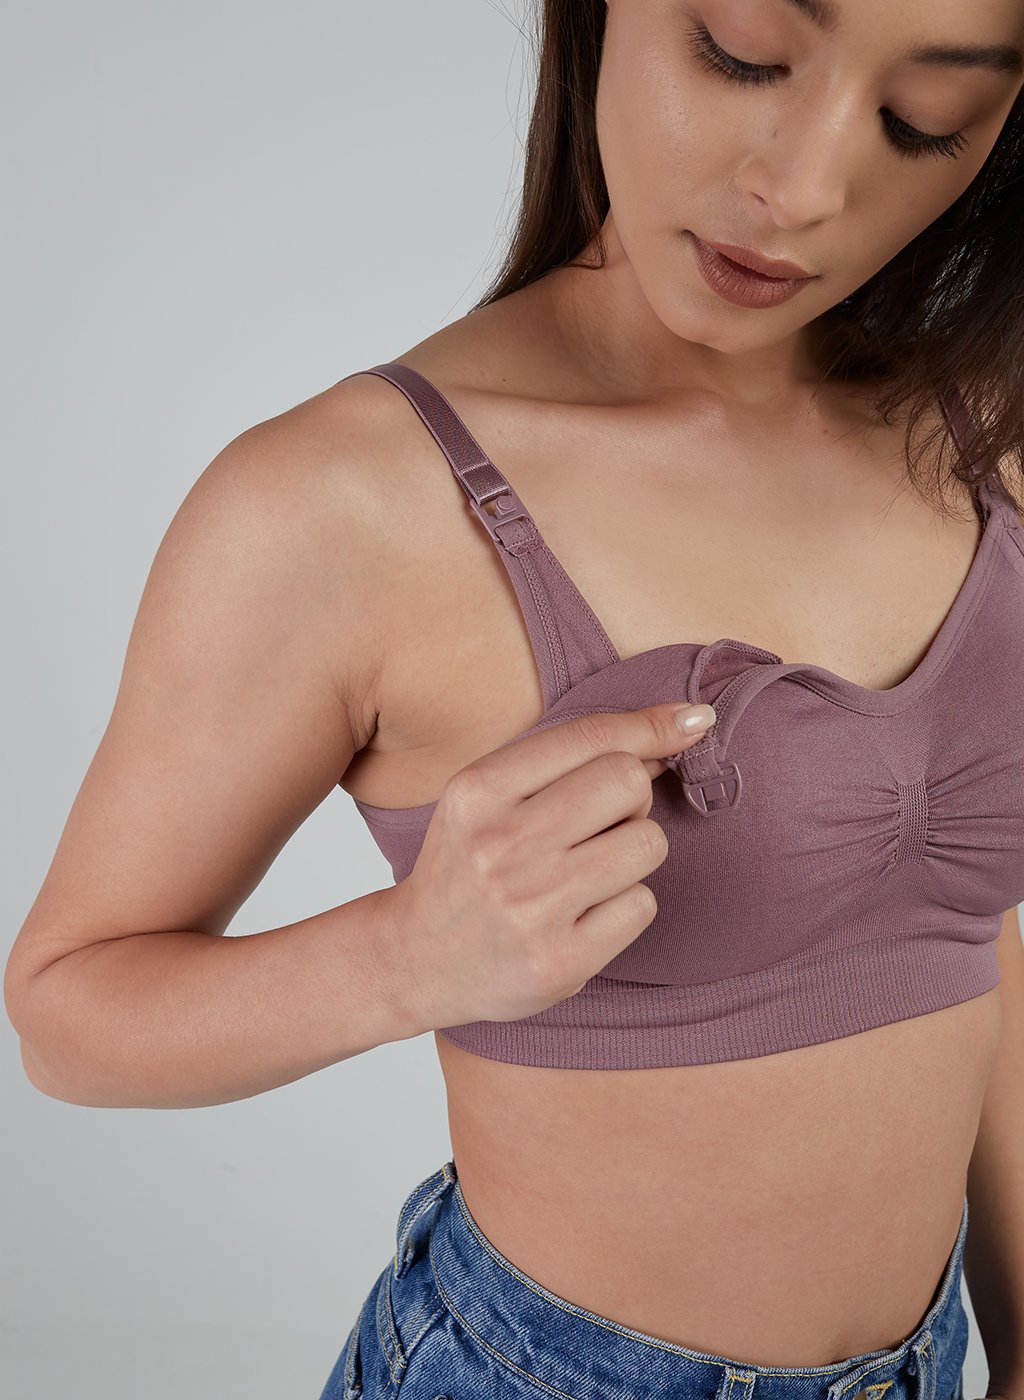 Choose the Right Nursing Bra! Here's What You Need to Know - Lovemère